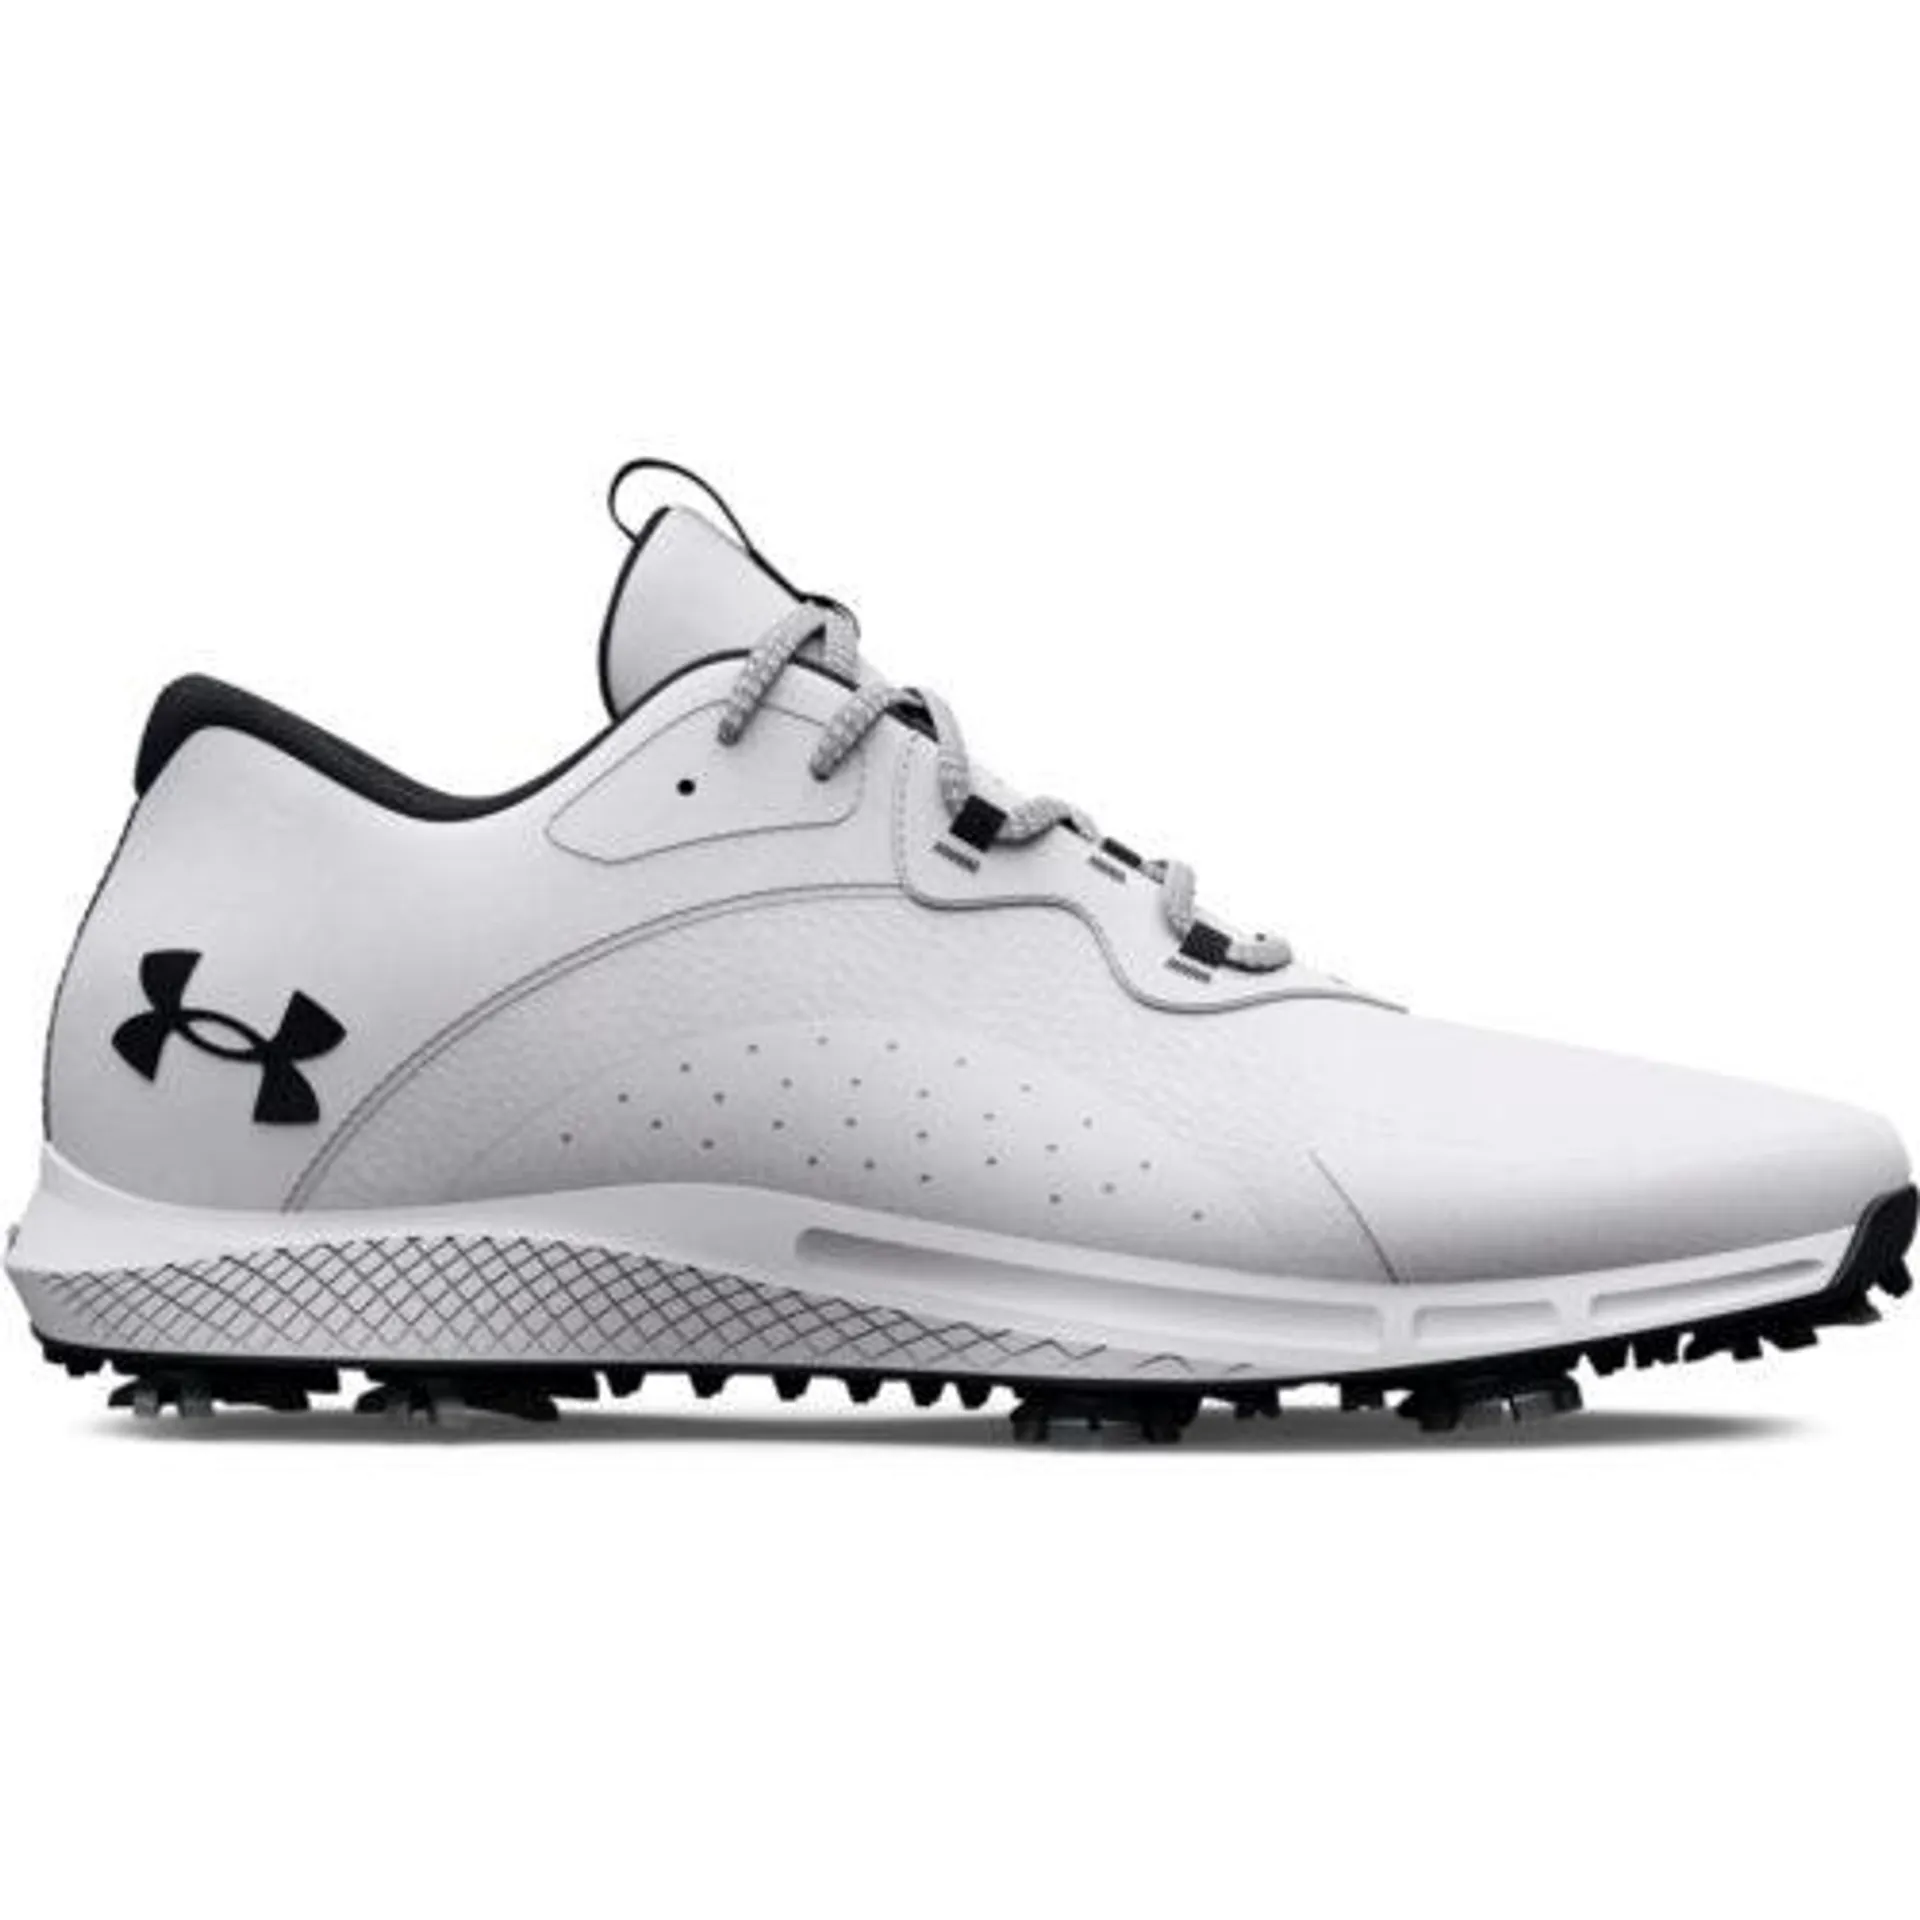 Under Armour Charged Draw 2 Wide Shoes – White 3026401-100